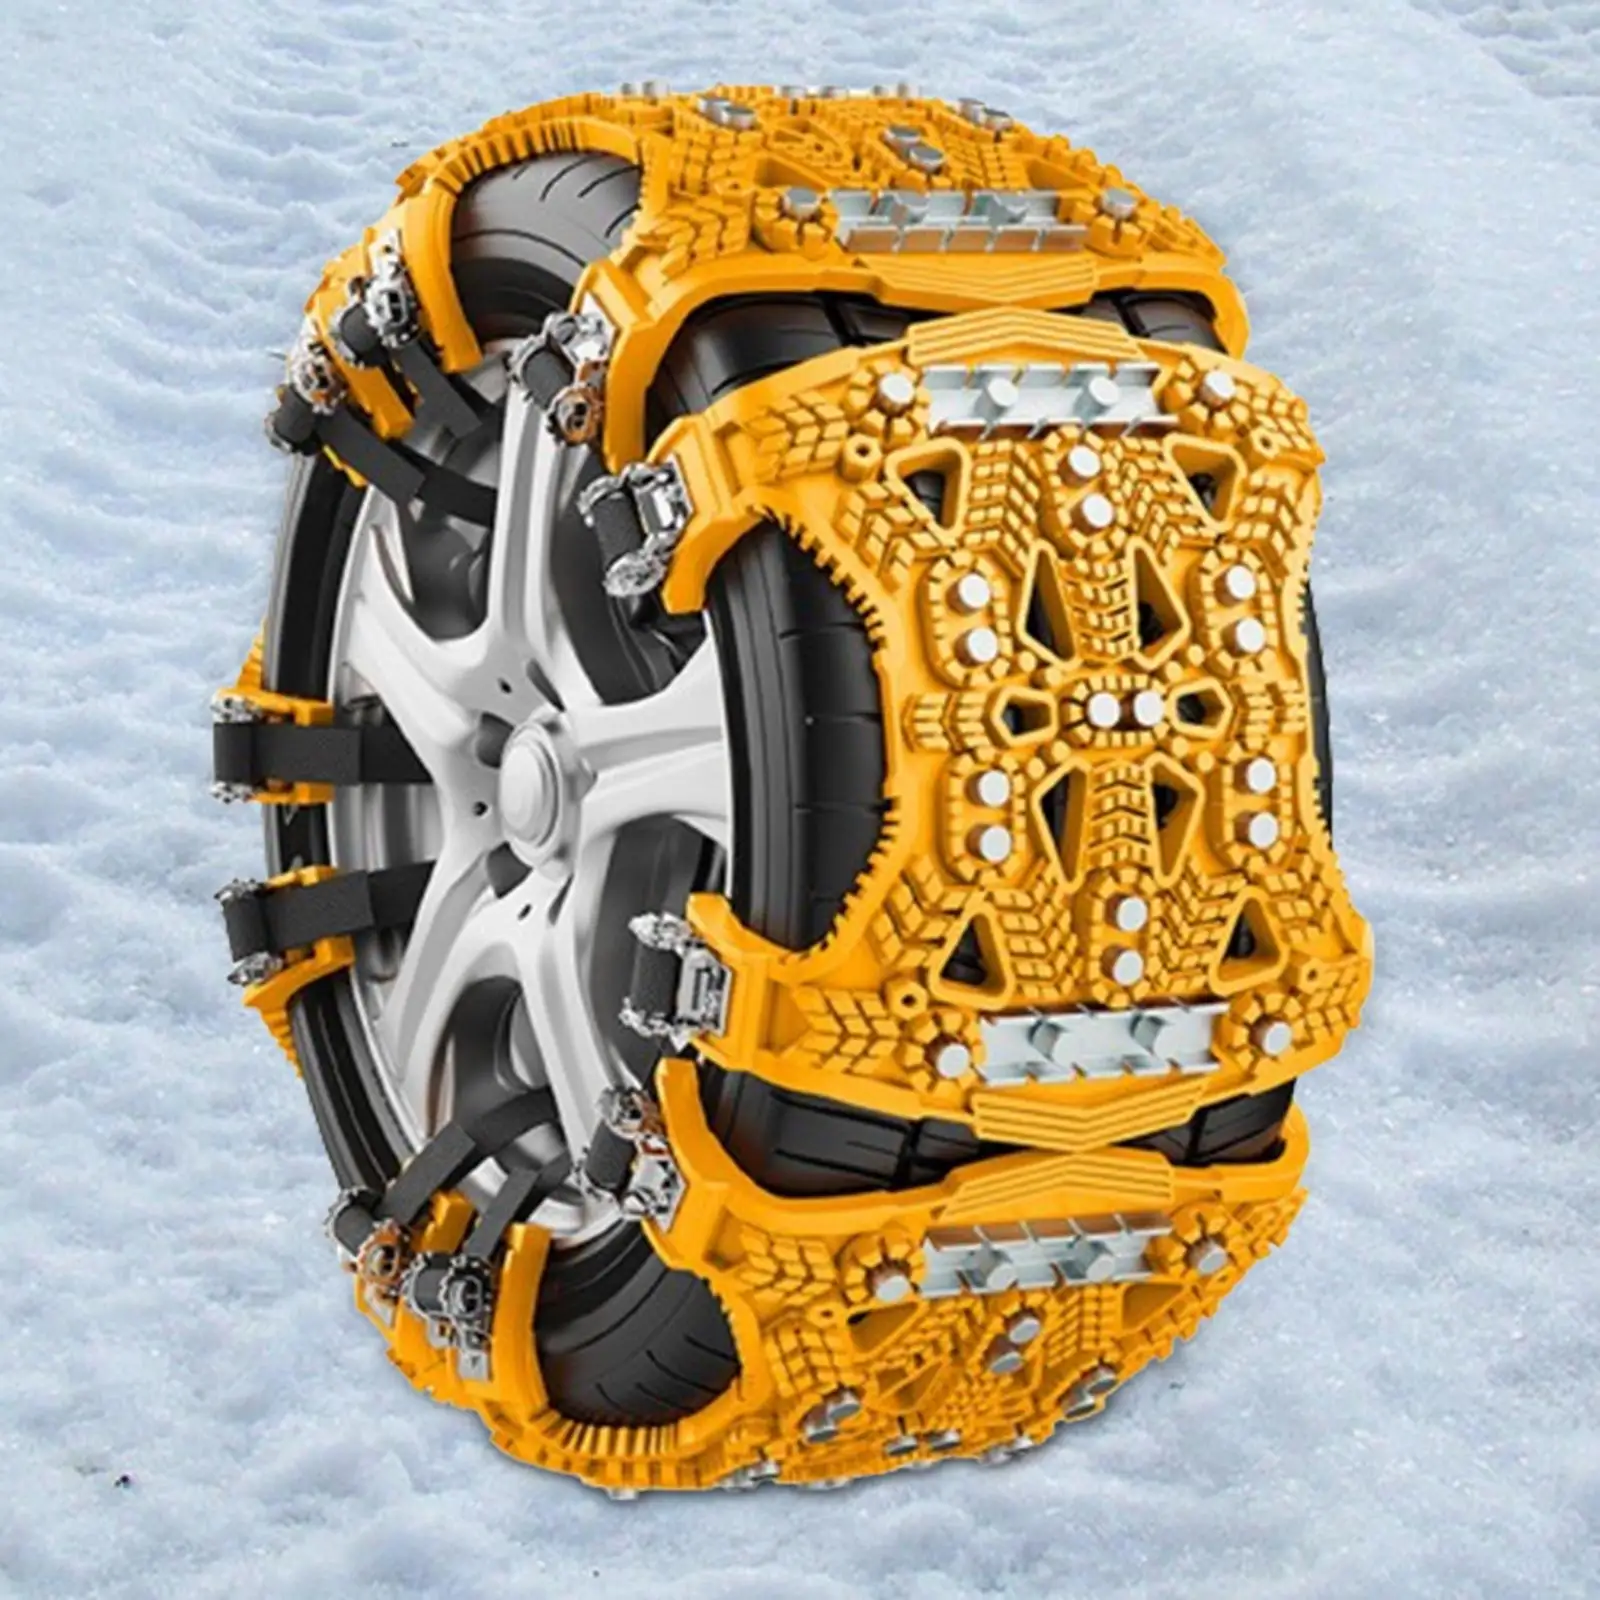 Car Tyres Anti Slip Snow Chain Anti Skid for Downhill Survival Traction